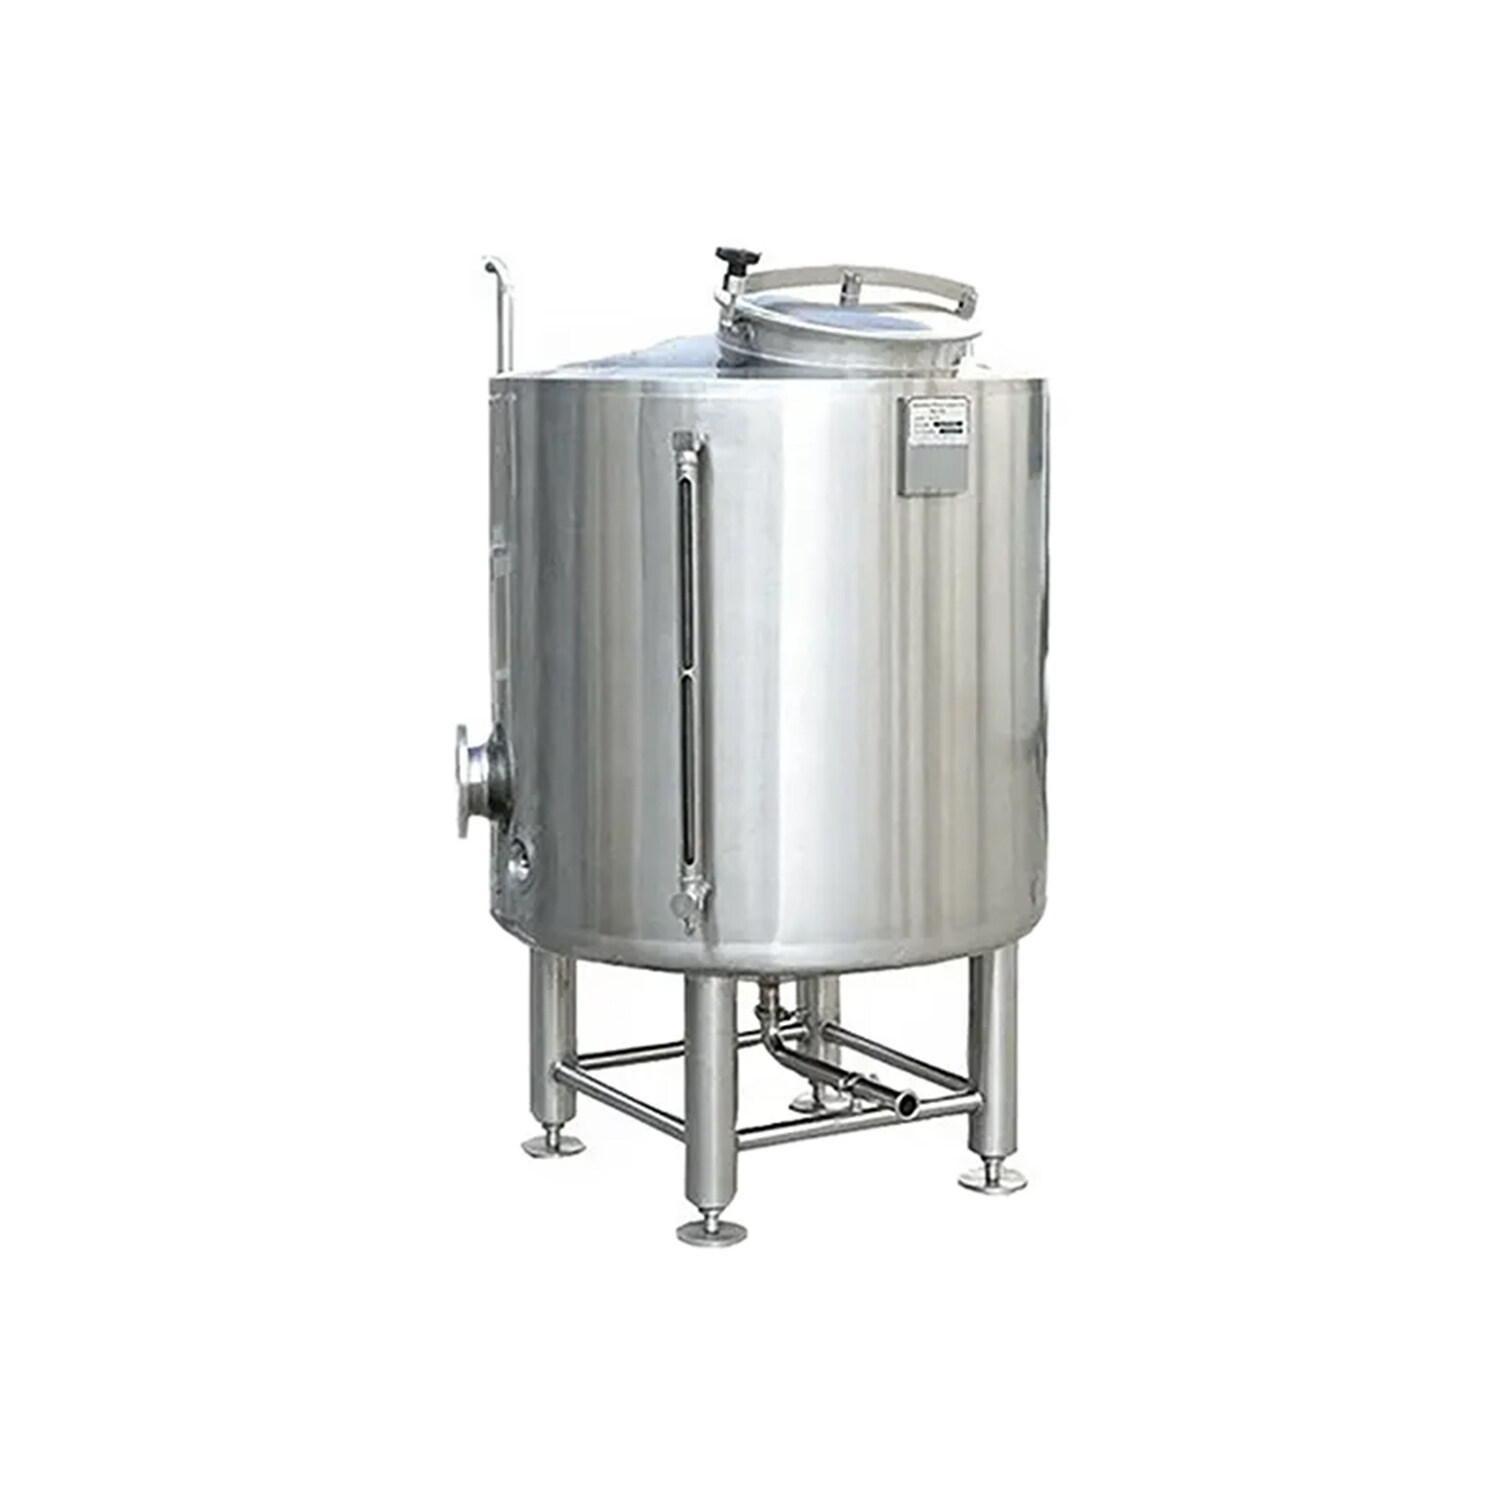 Maximizing Efficiency: Stainless Steel Mixing Tanks with Agitators